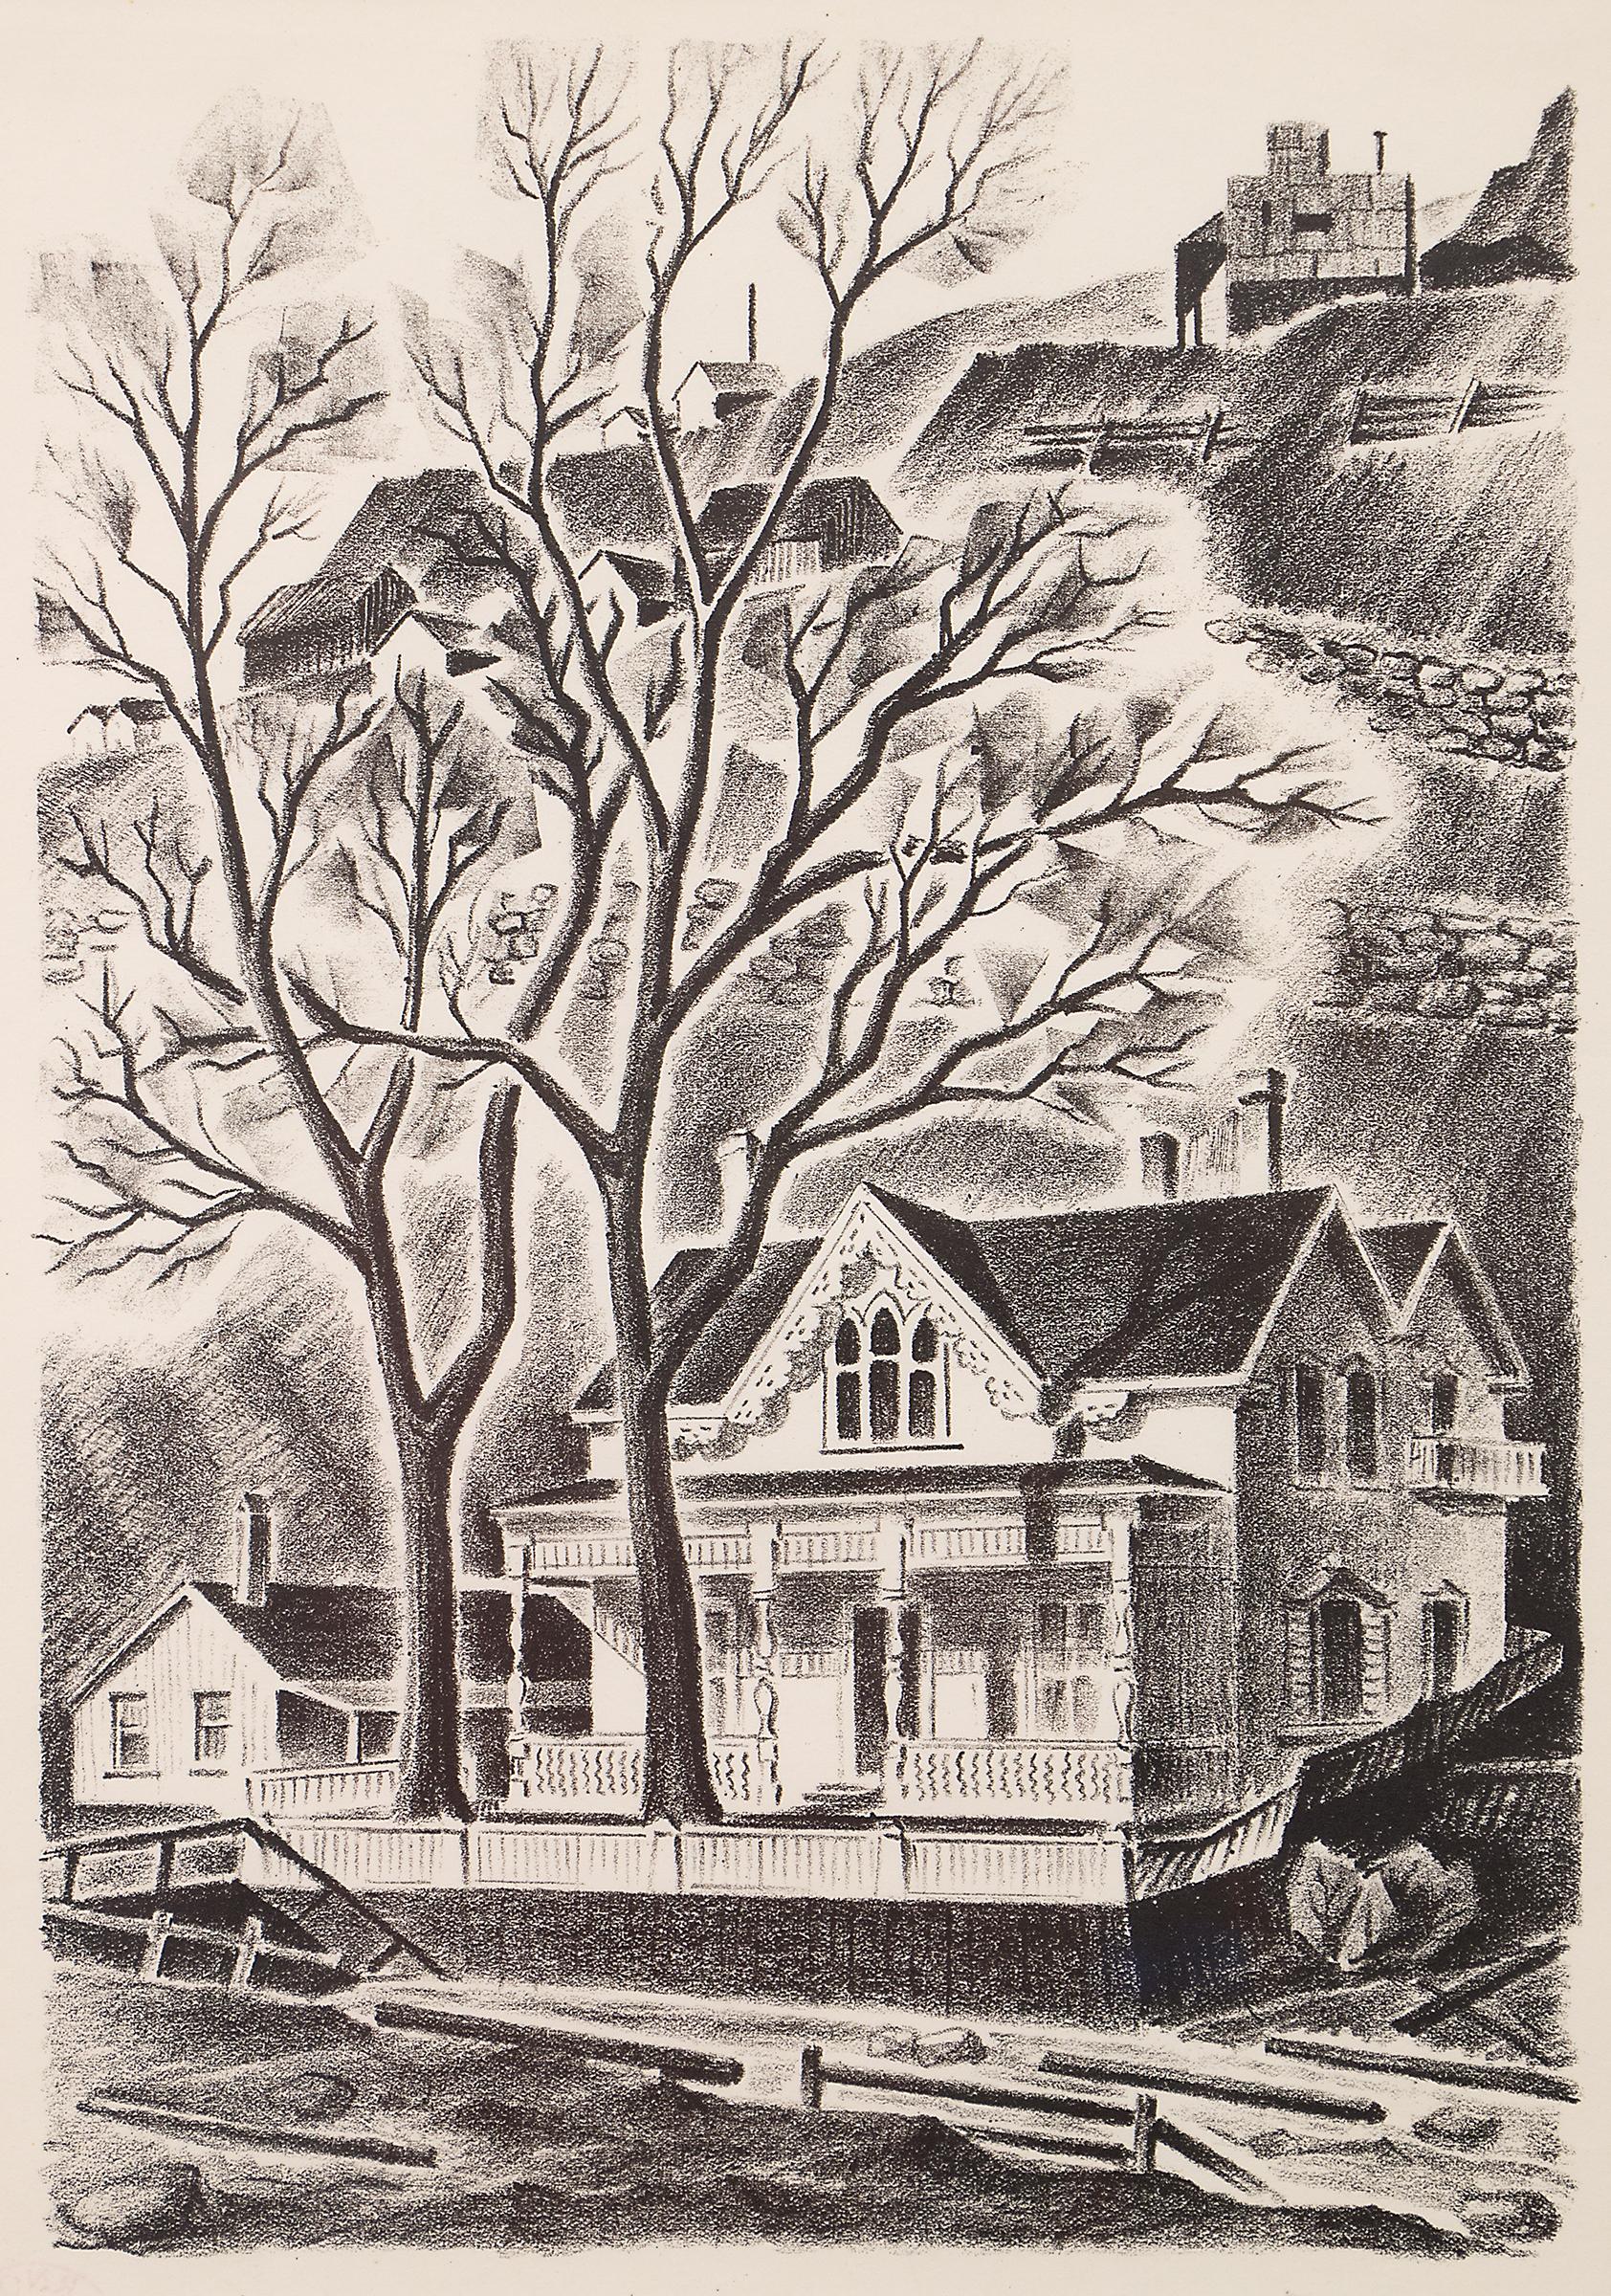 House at Gregory Point (Colorado), 1930s Black and White Landscape Lithograph  - Print by Arnold Ronnebeck